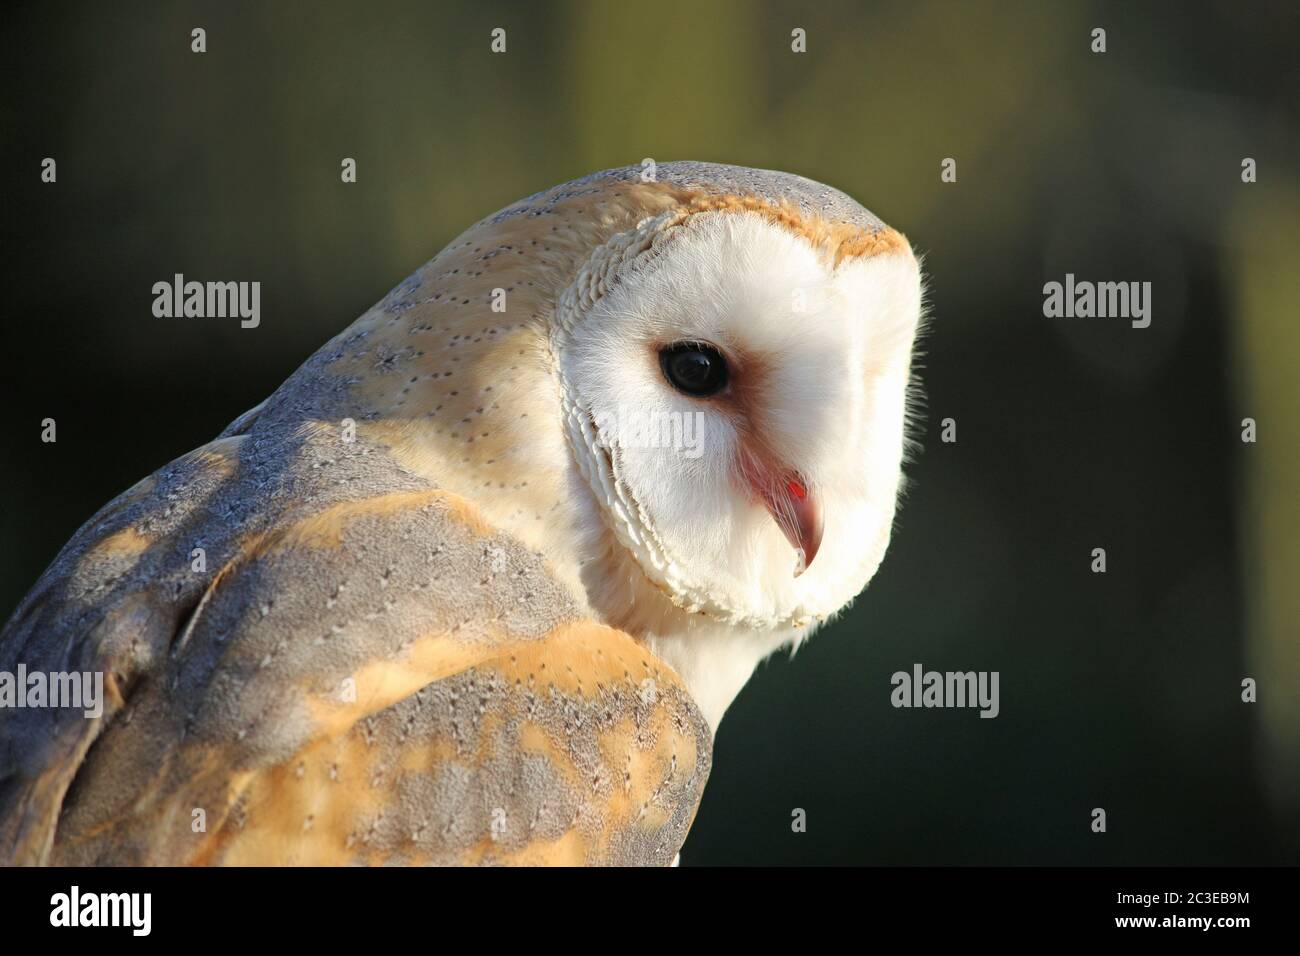 Head and shoulders of a barn owl, Tyto alba, with a dark green and black blurred background of trees and plants. Stock Photo